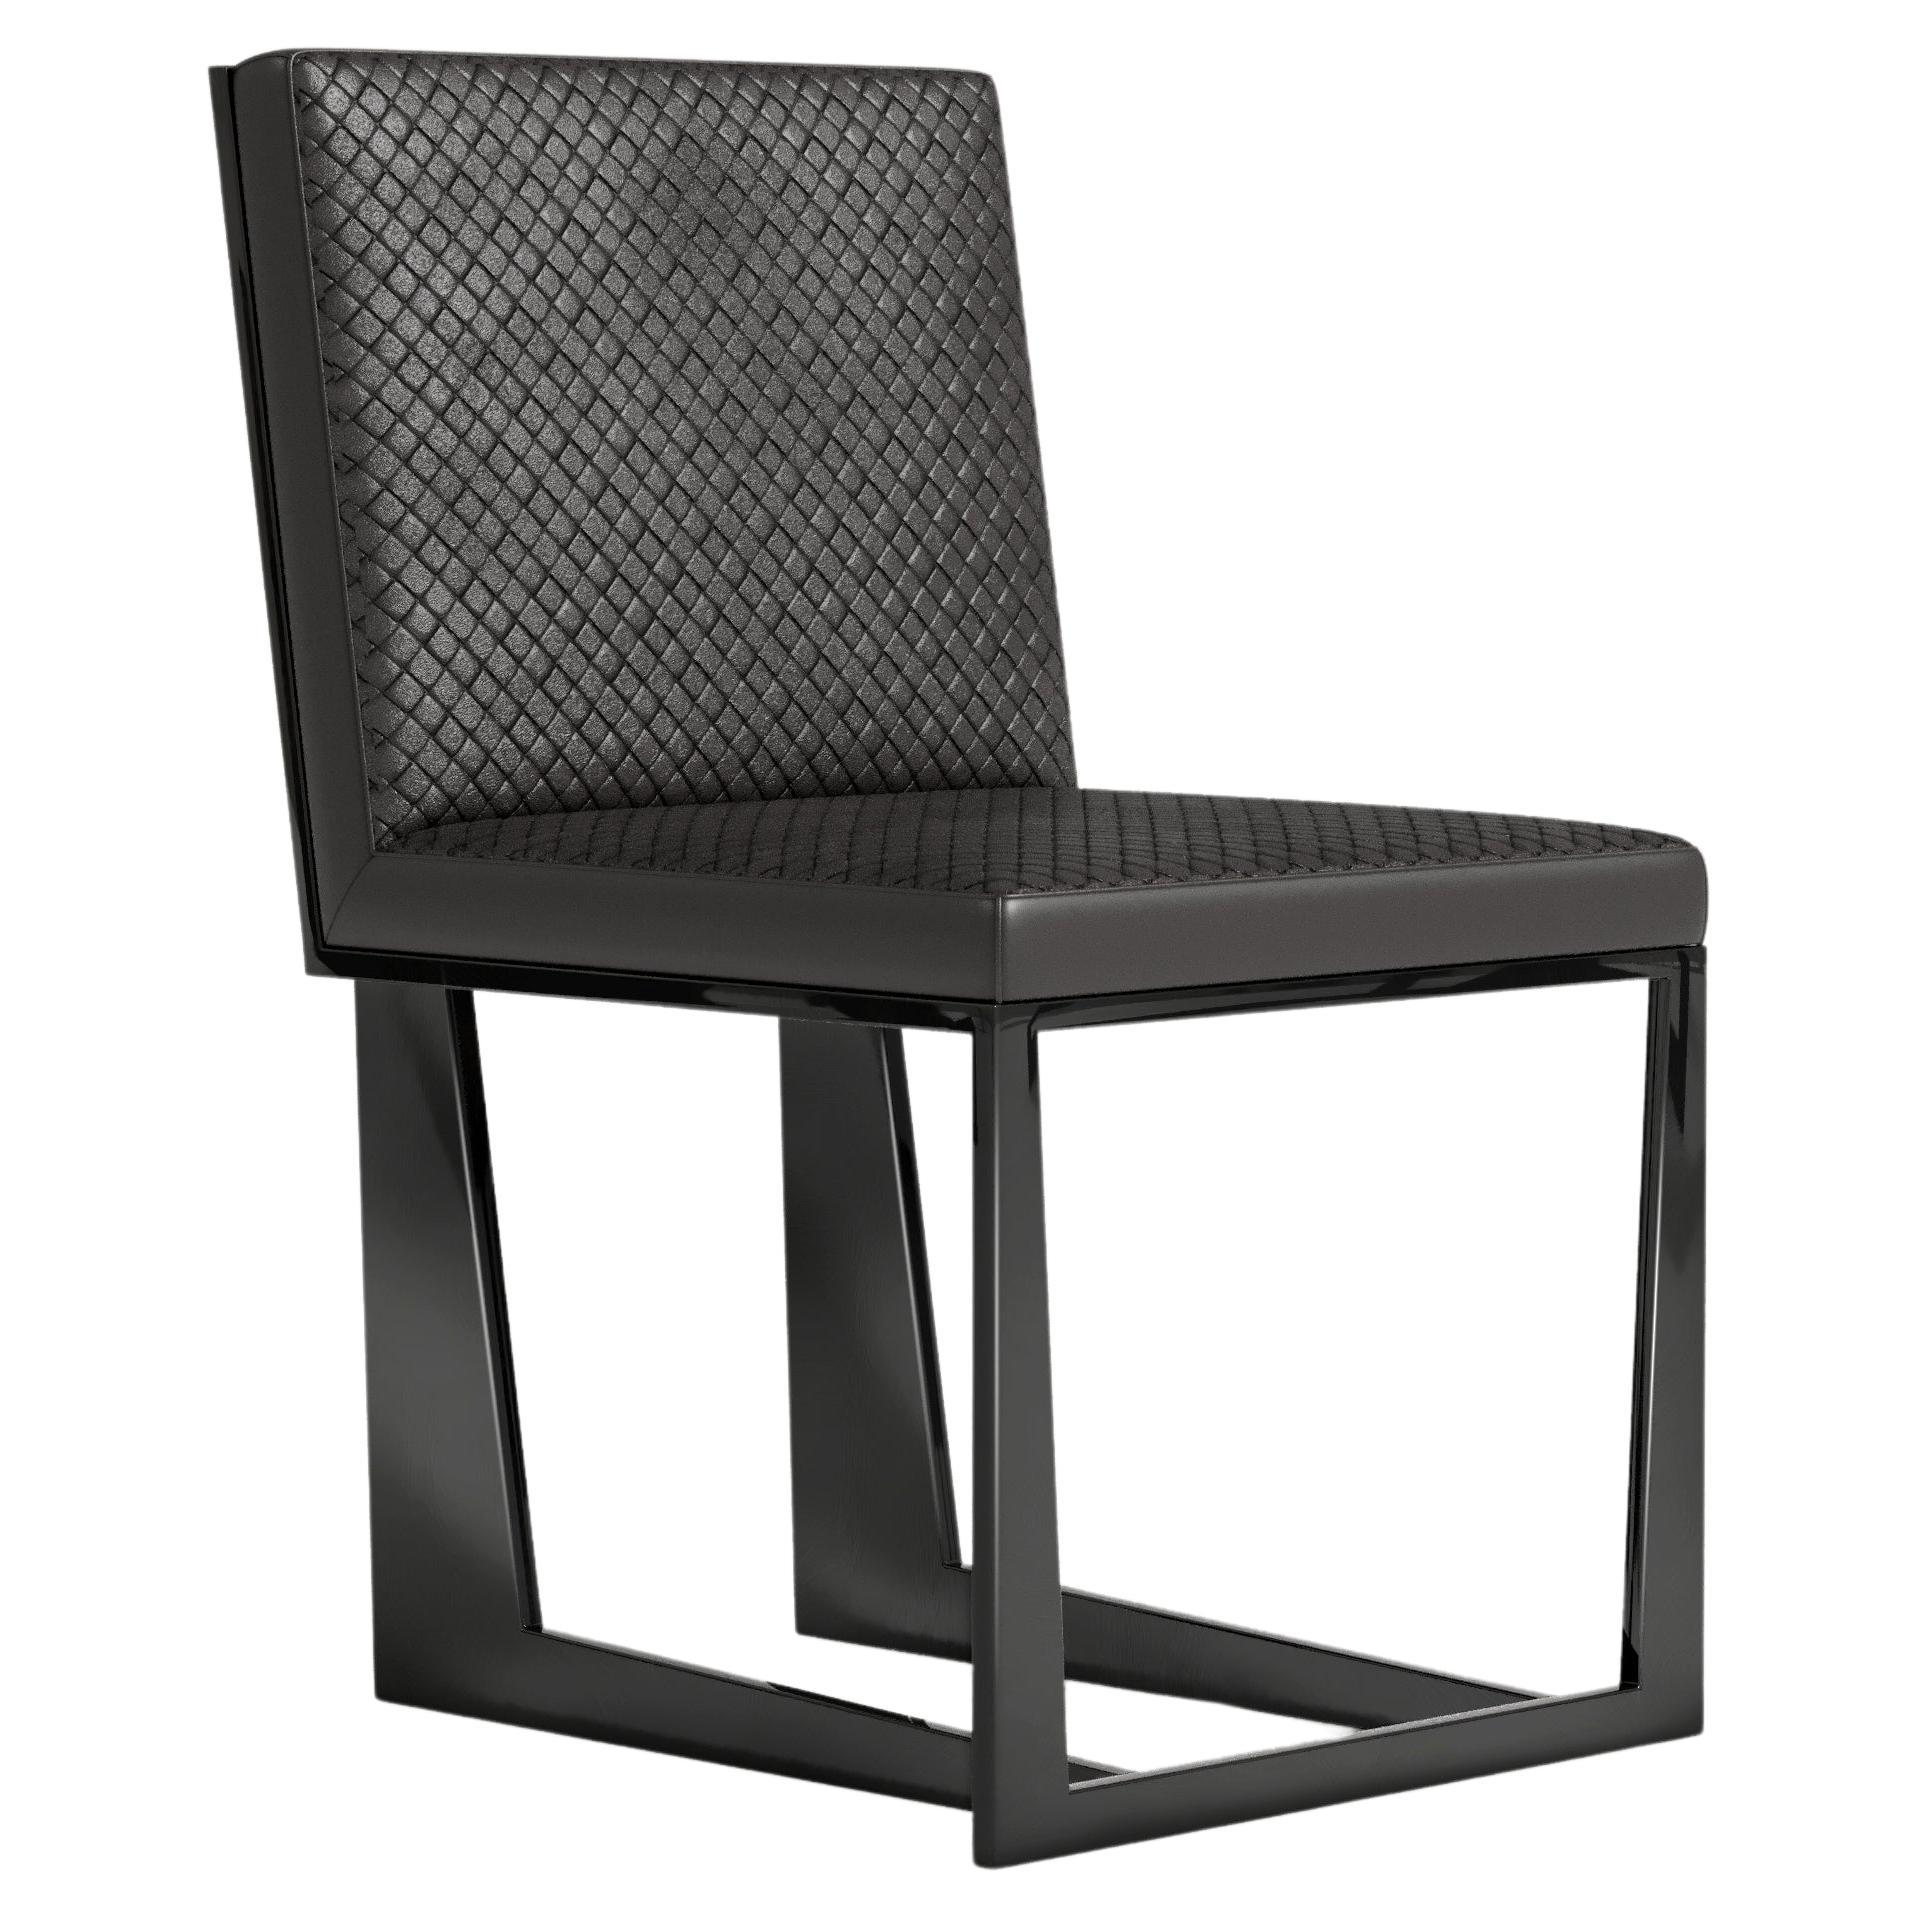 Affilato Chair in Black Lacquer and Bottega Leather by Palena Furniture